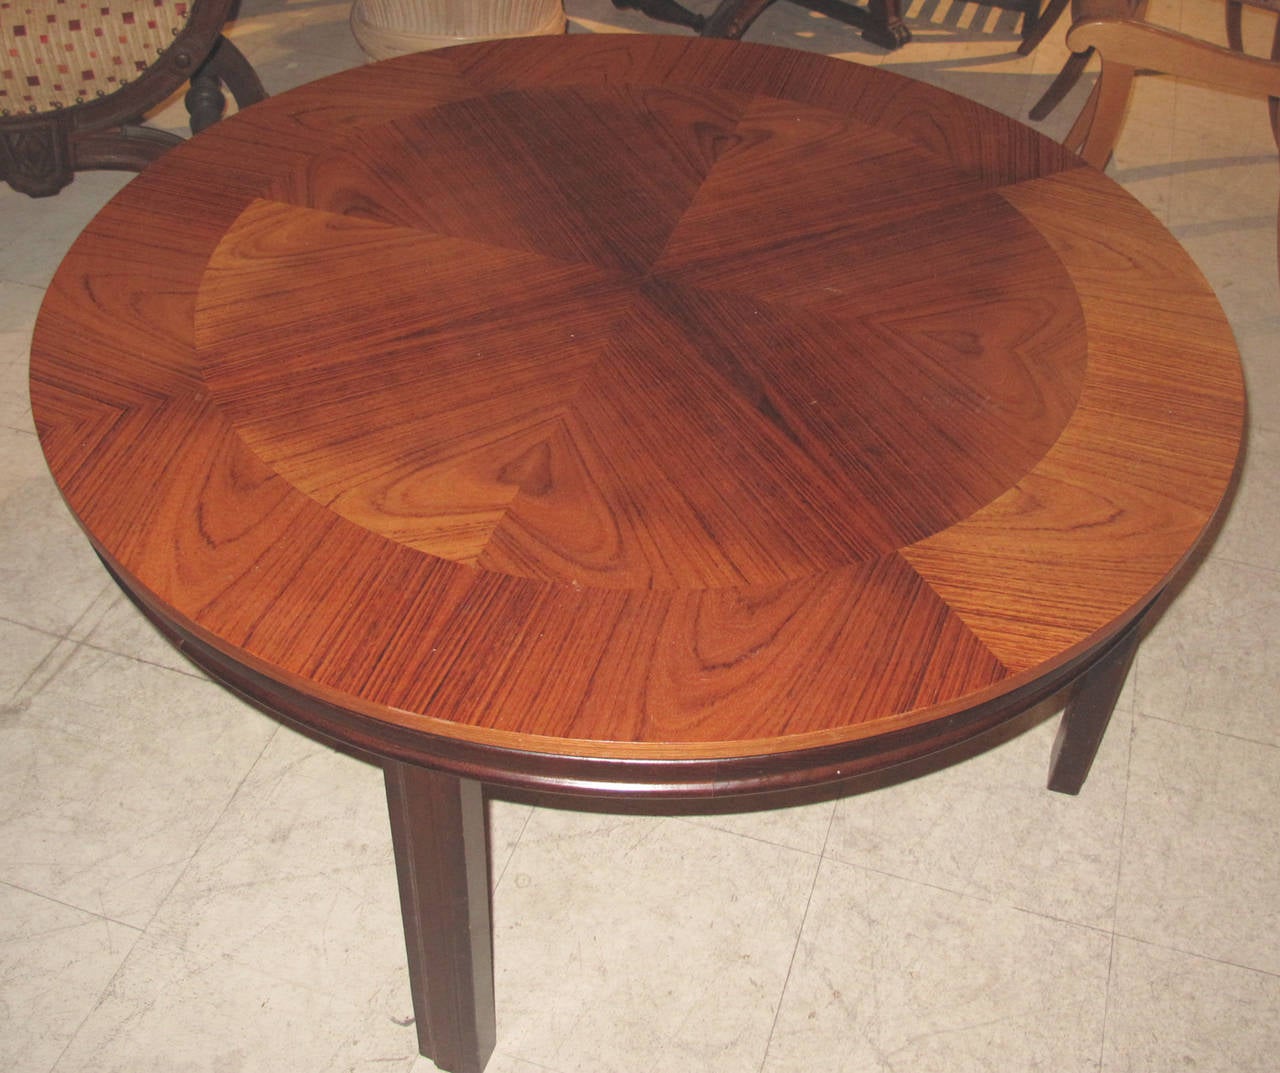 Mid-Century Modern Danish Mahogany Circular Coffee or Low Table with Patterned Top